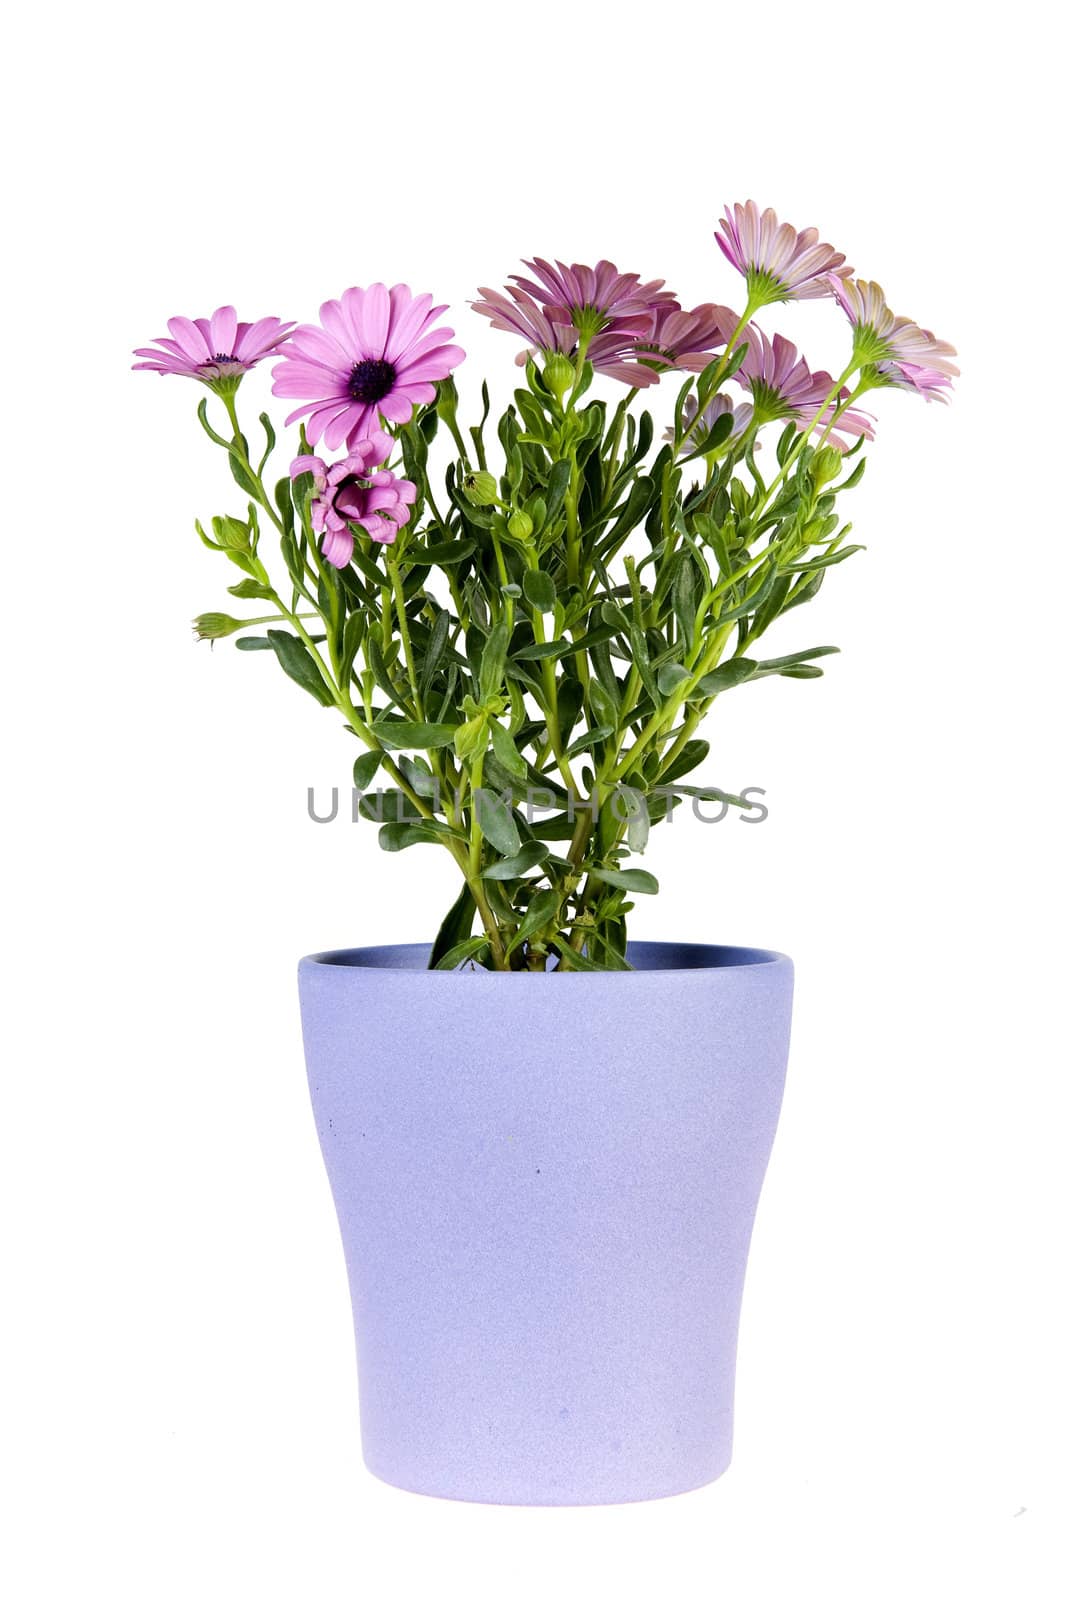 a spanish daisy in a lila vase on a white background